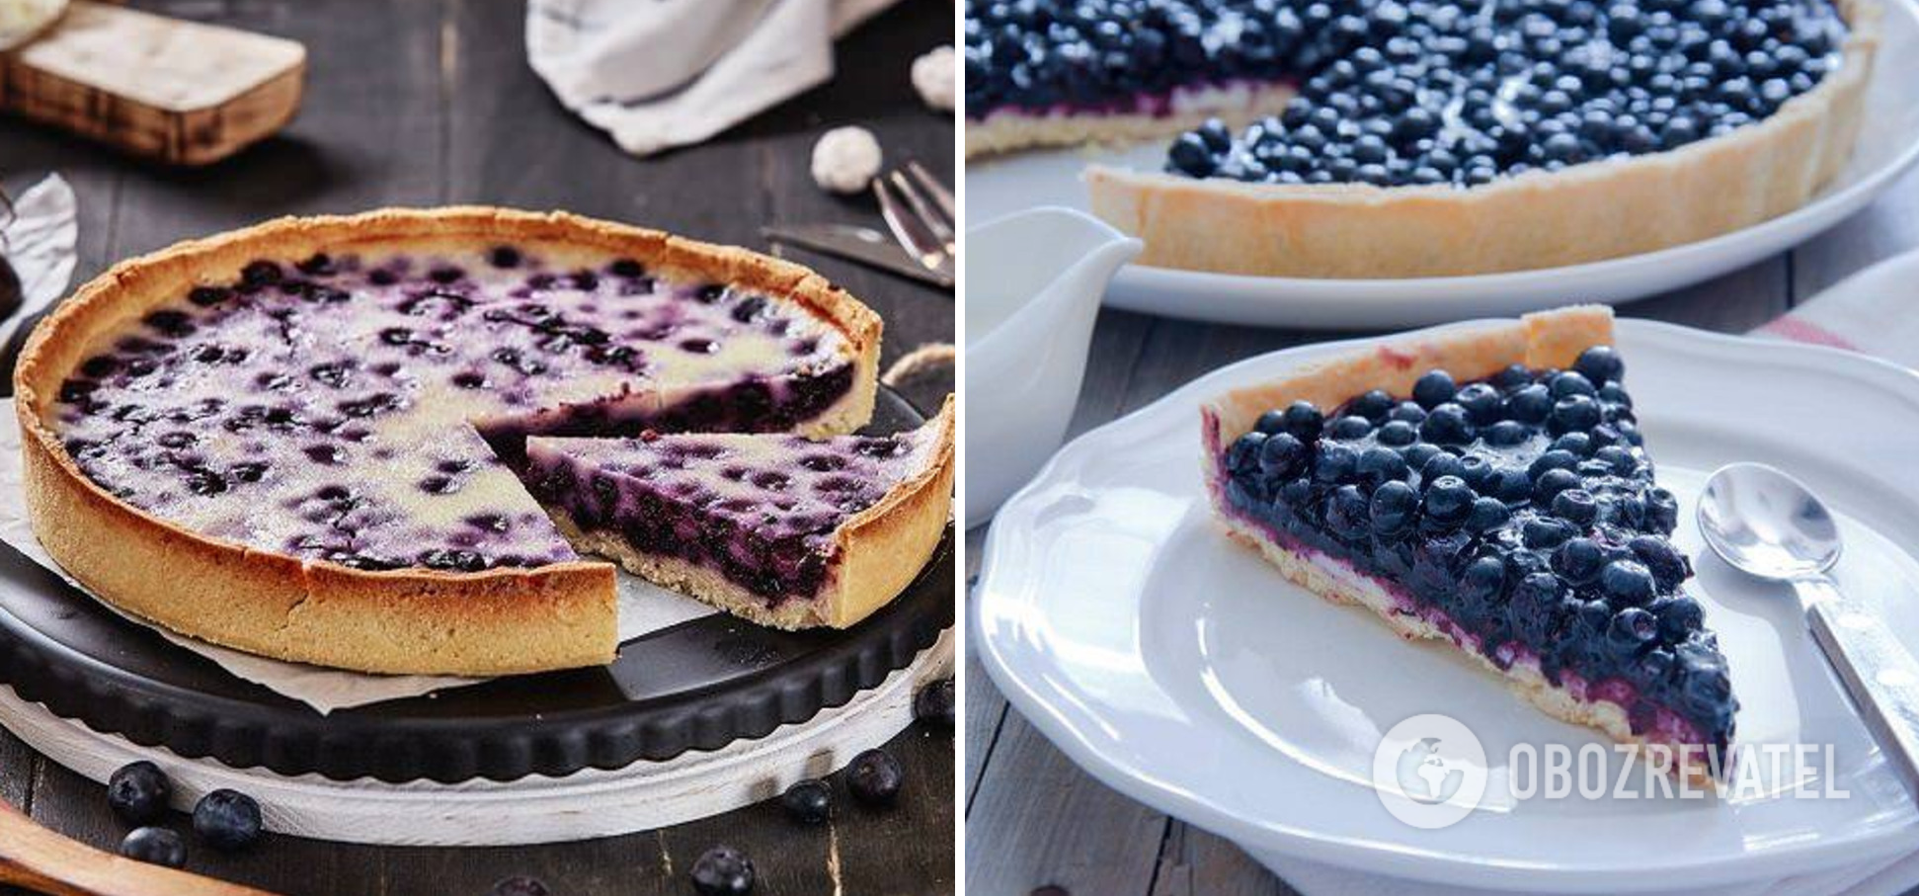 Blueberry pie with blueberries